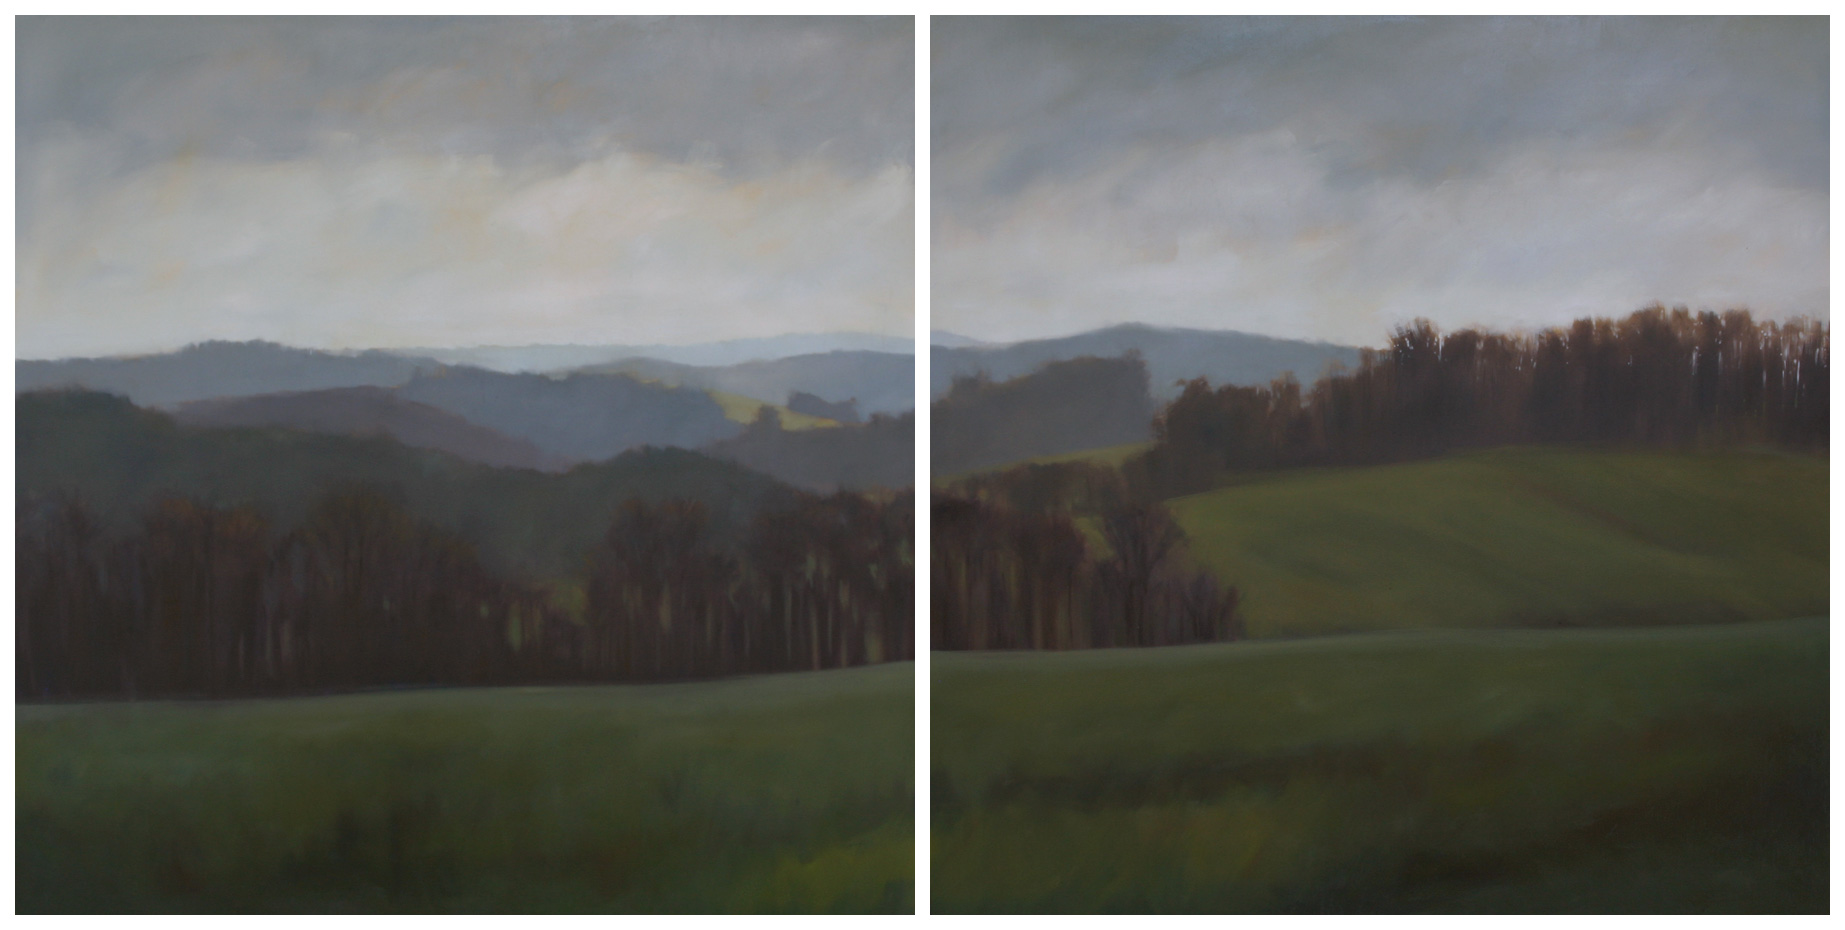 Stahl Farm, 48x96 inches (diptych)